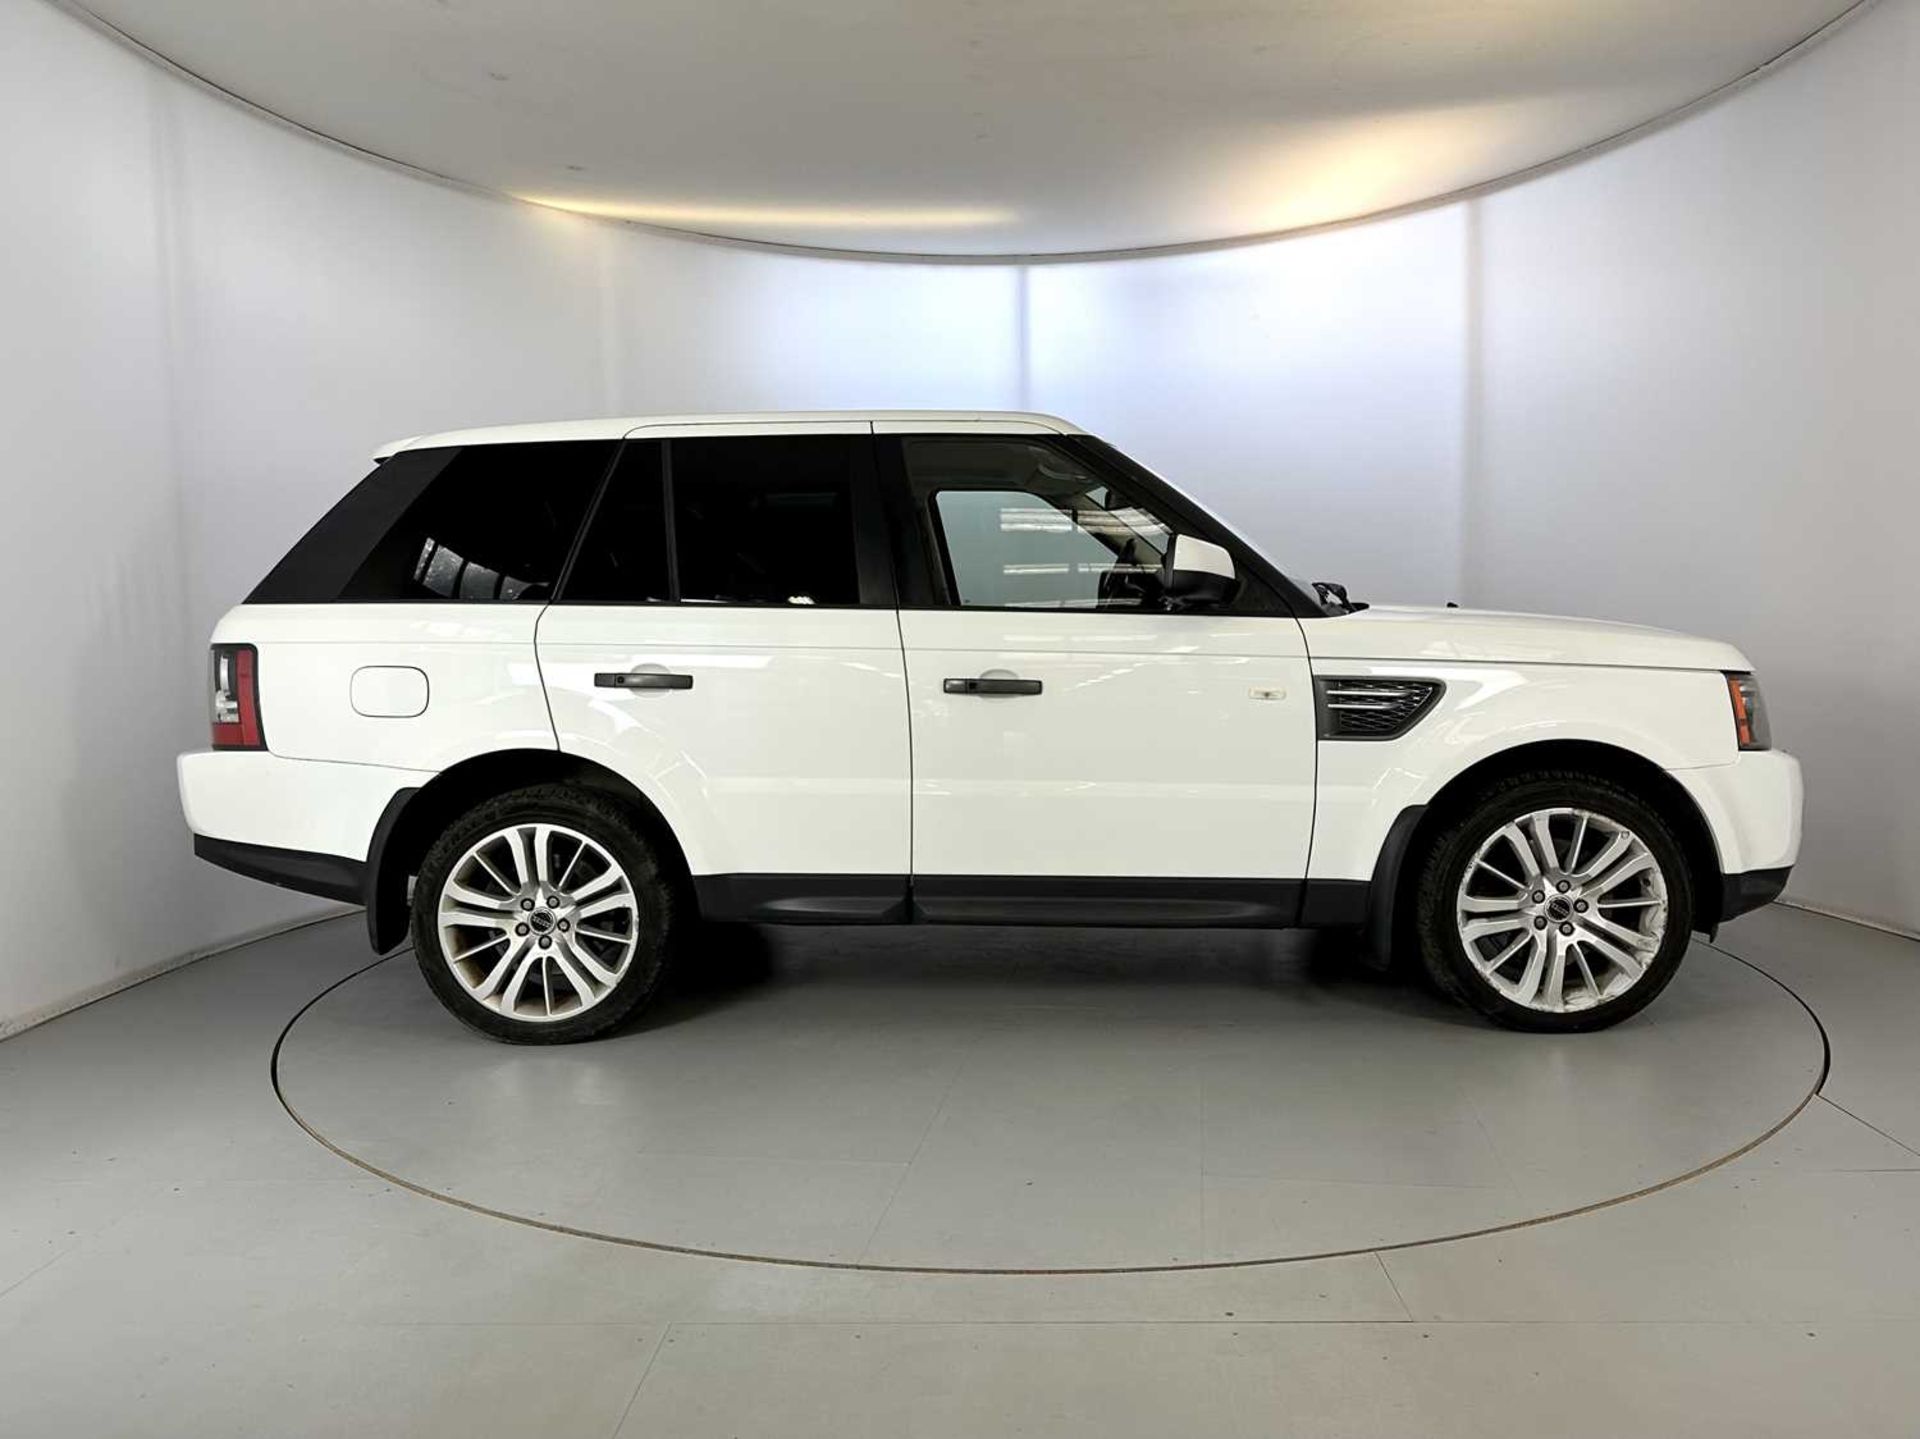 2010 Land Rover Range Rover Sport - Image 11 of 34